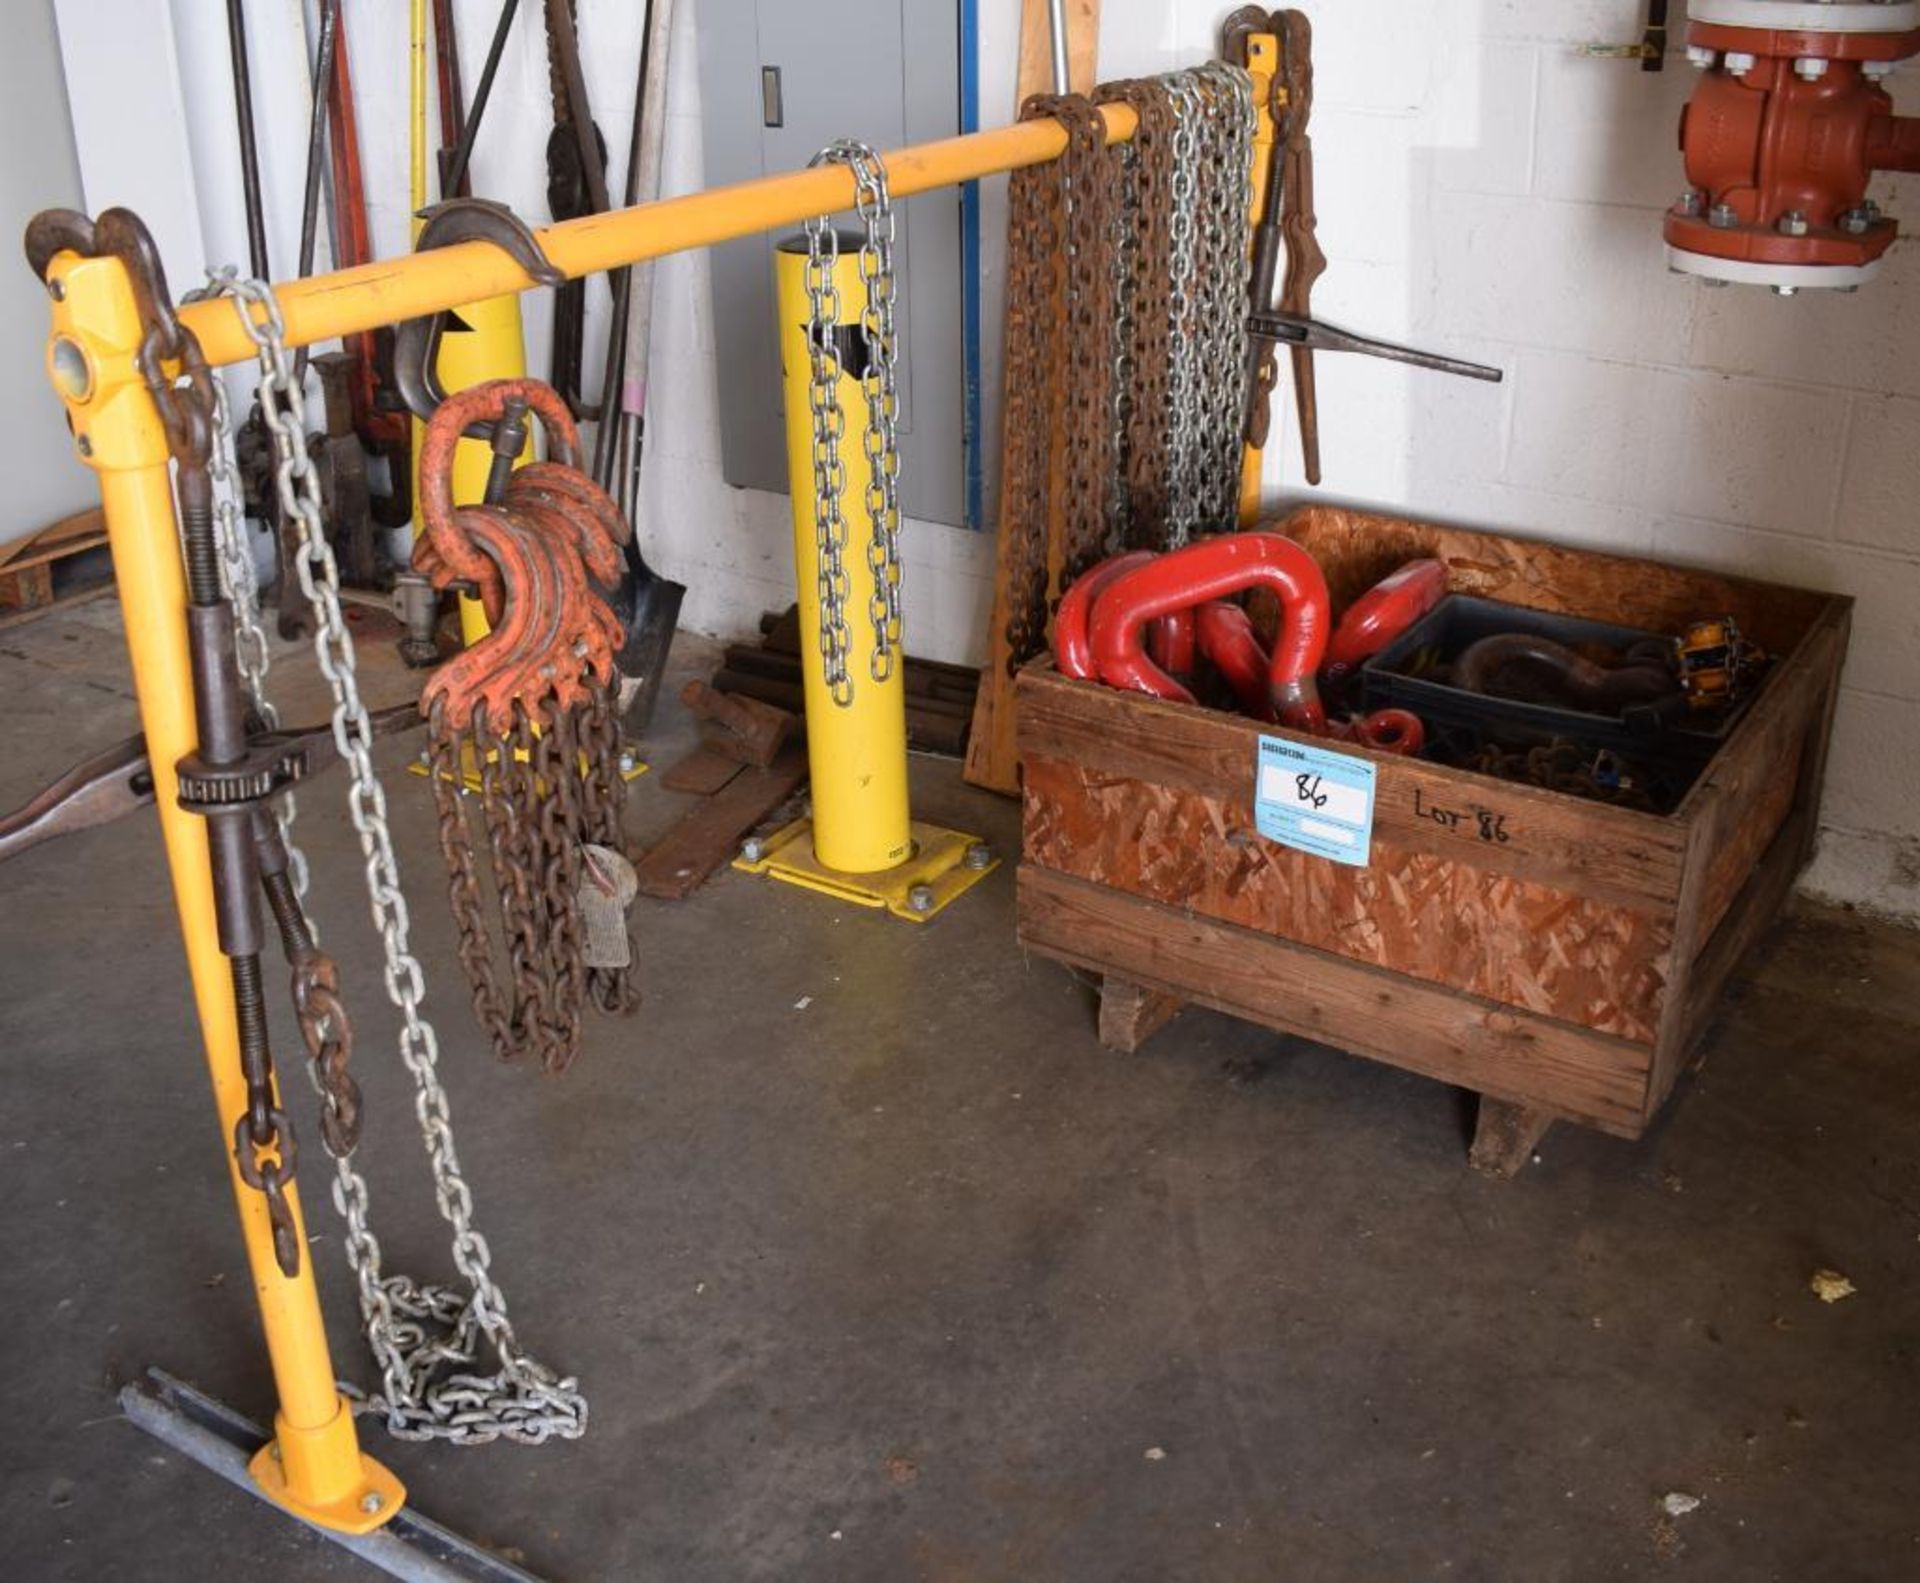 Lot Of Miscellaneous Rigging. With shackles, chain, come along and hooks.